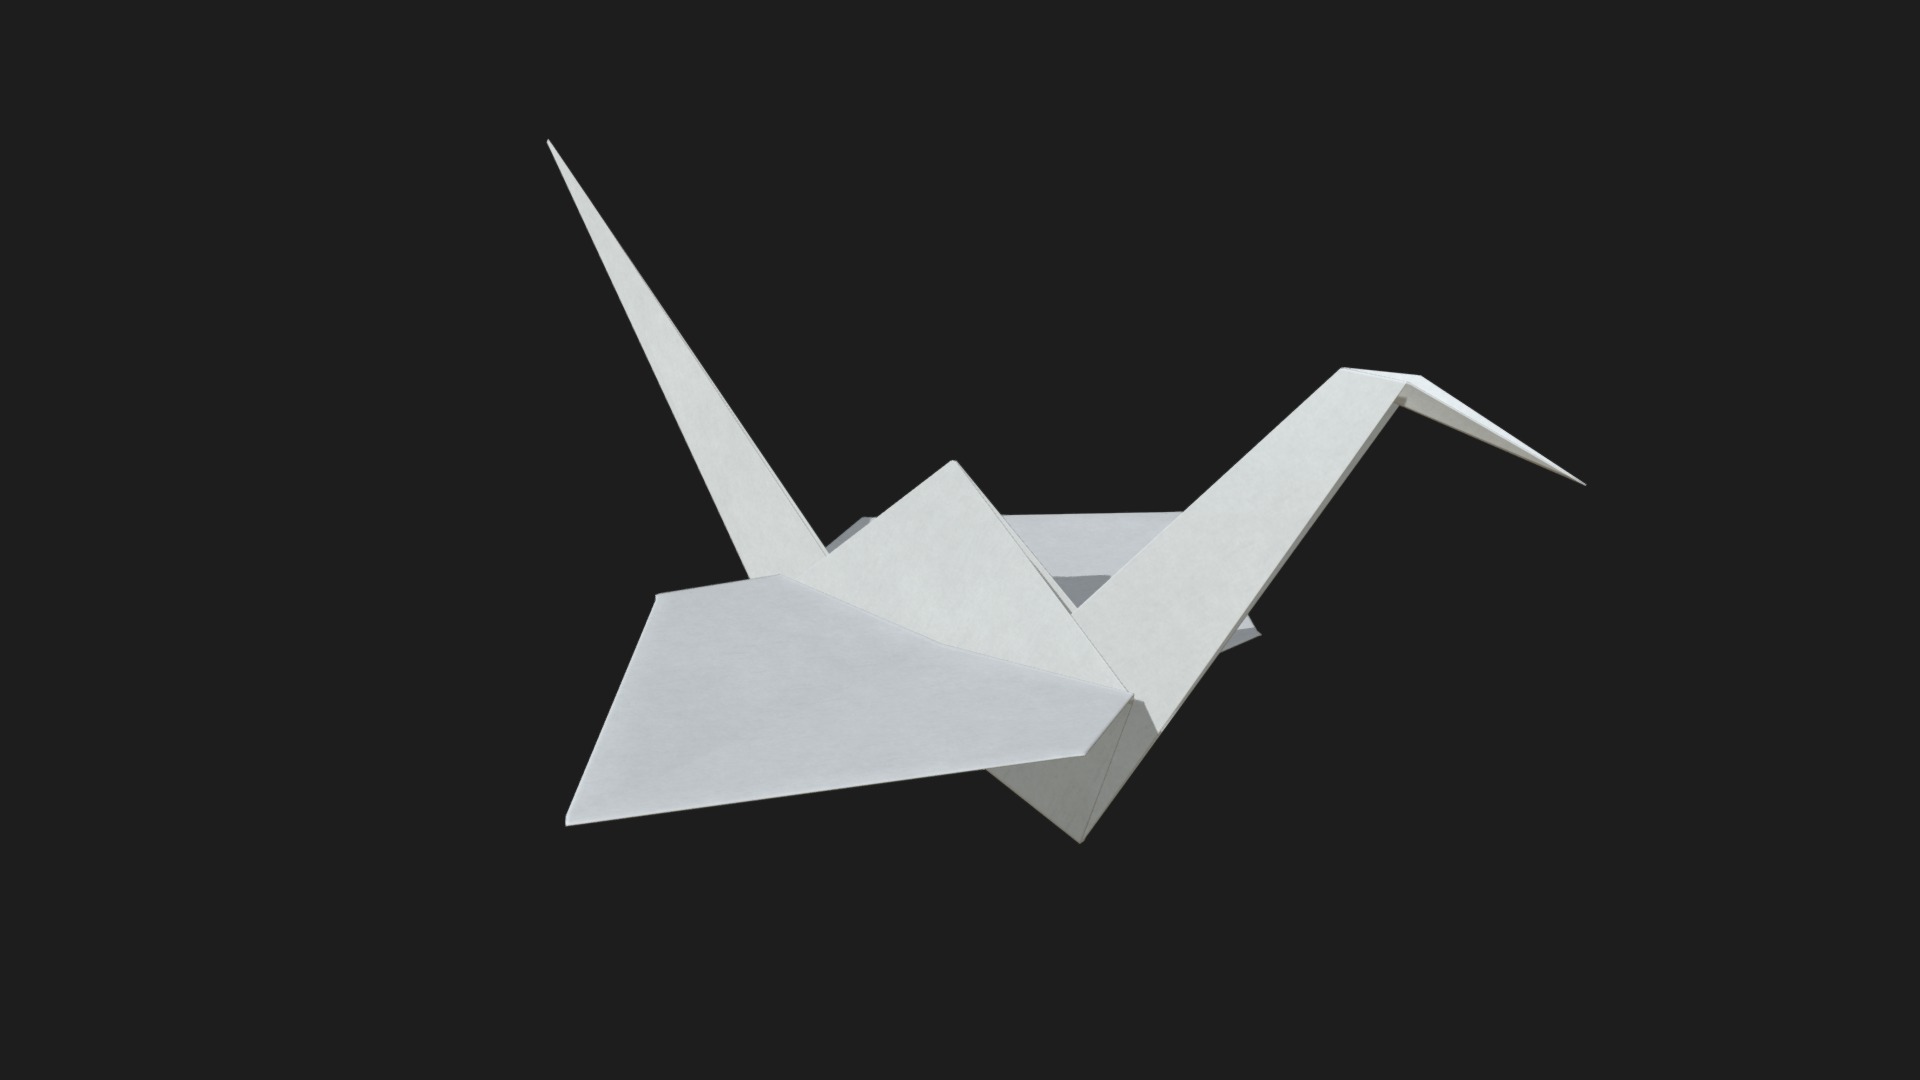 3D model Origami paper crane - This is a 3D model of the Origami paper crane. The 3D model is about a white paper airplane.